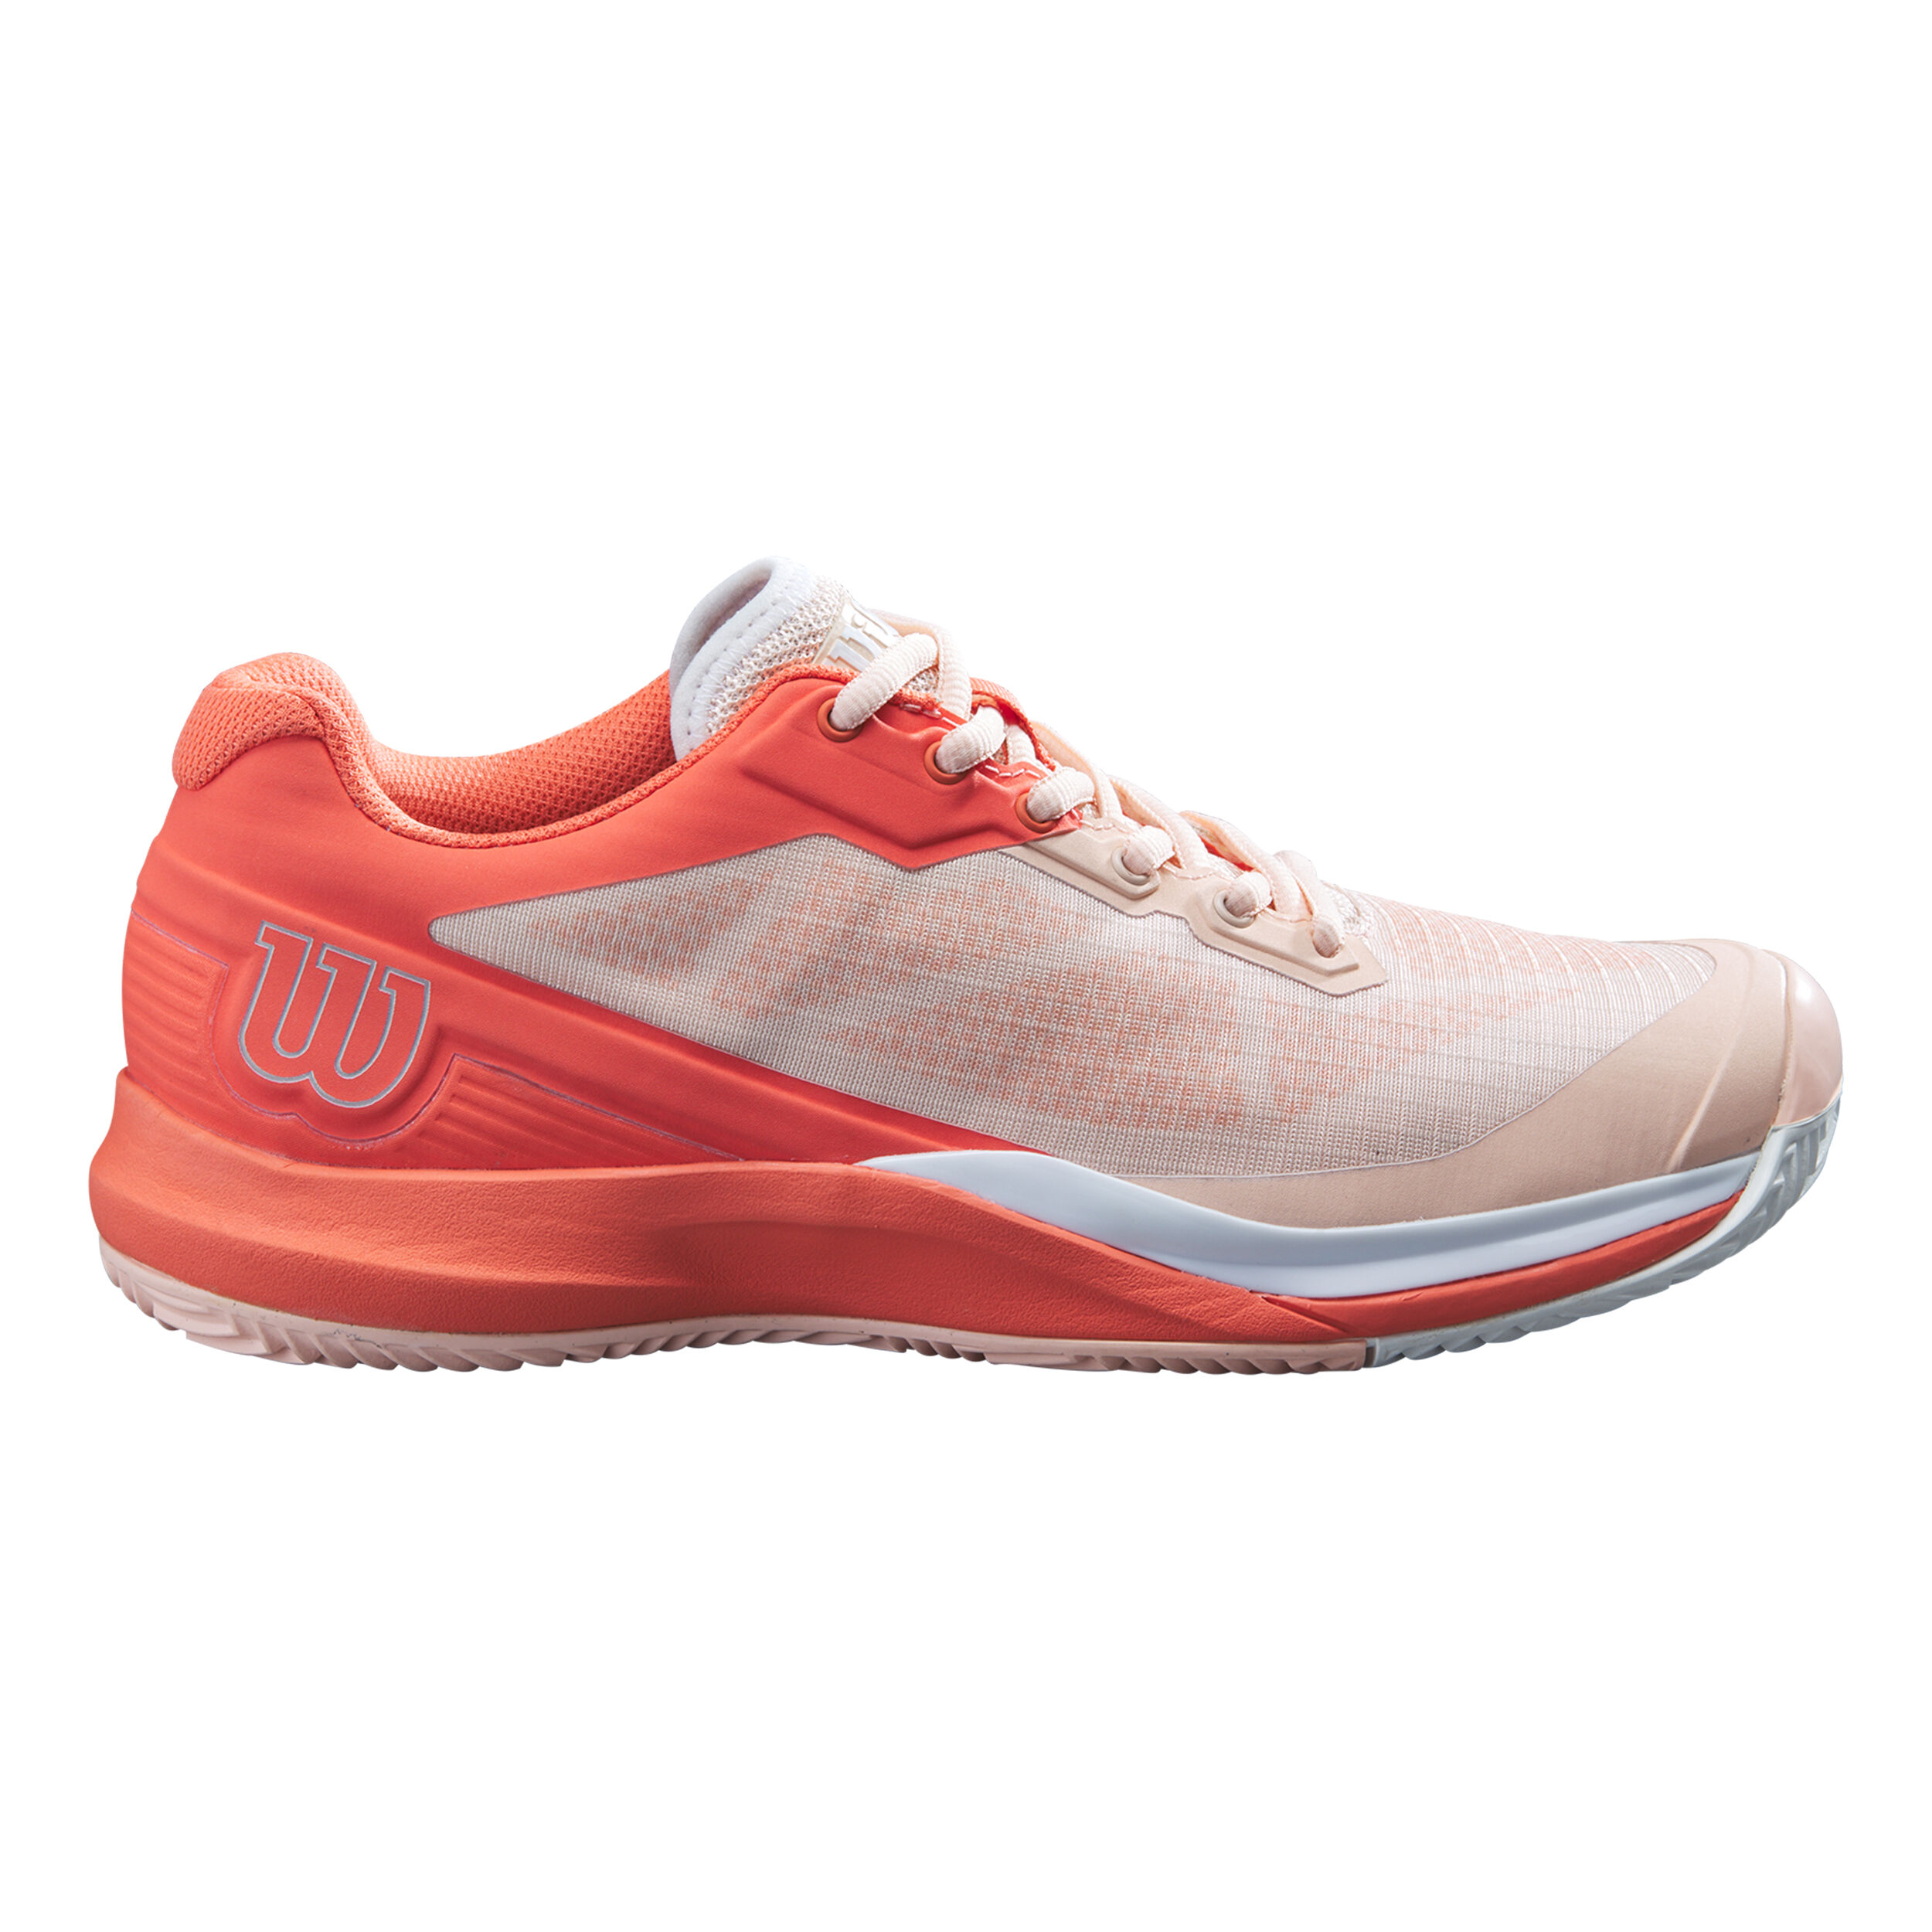 for Clay Courts,... Rush Pro 3.0 Clay W Synthetic Wilson Women's Tennis Shoes 